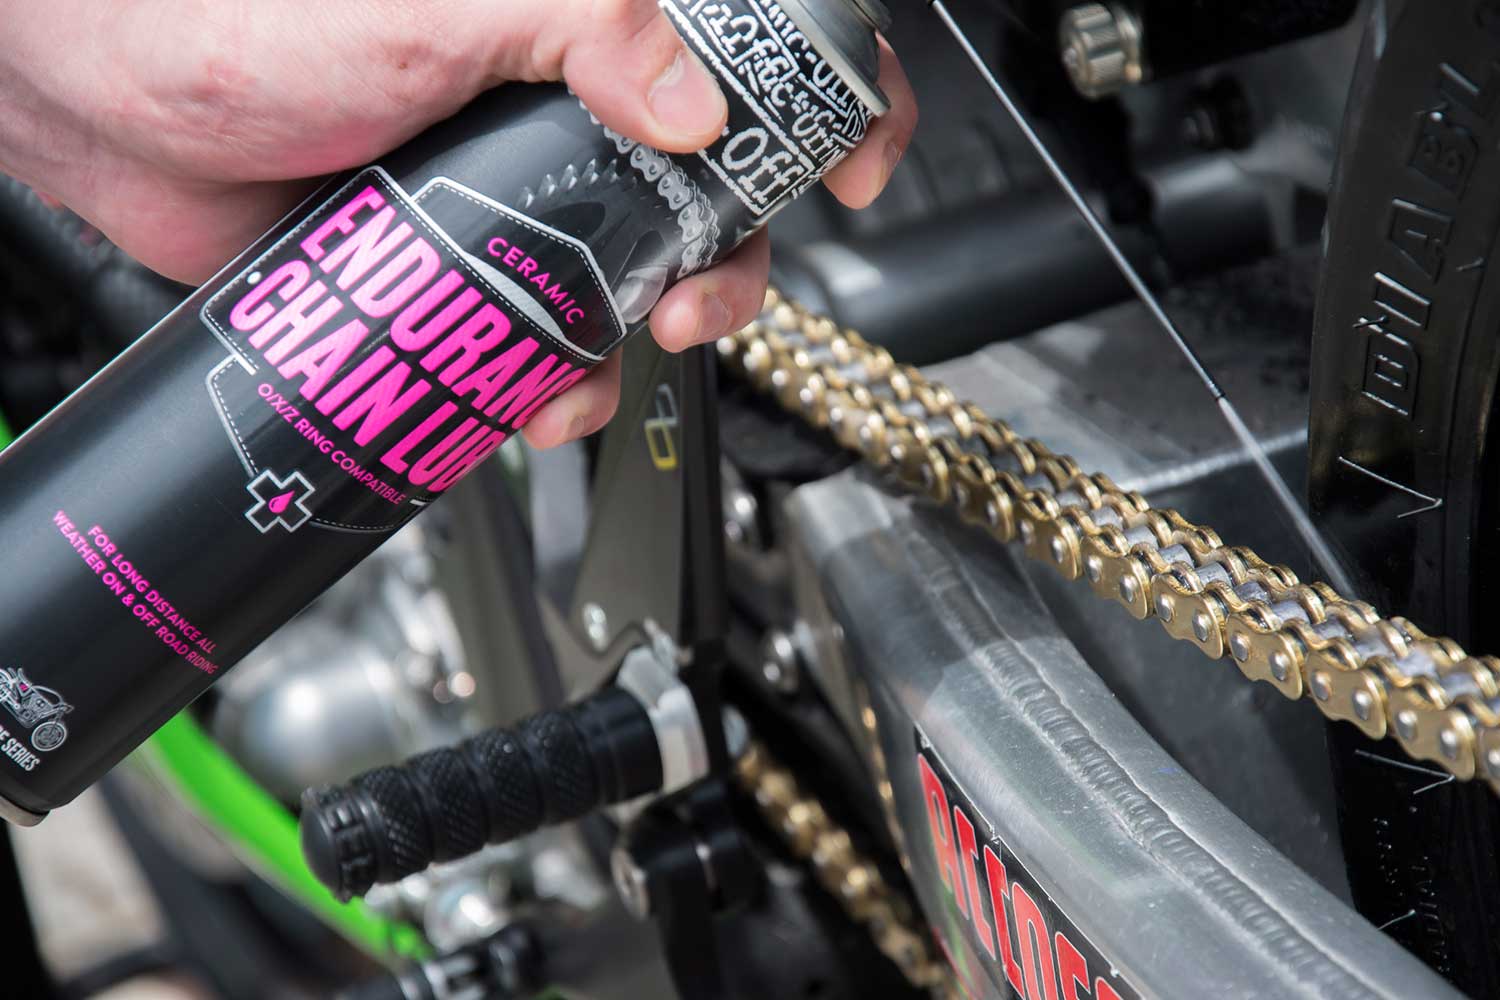 New Muc Off Endurance motorcycle chain lube